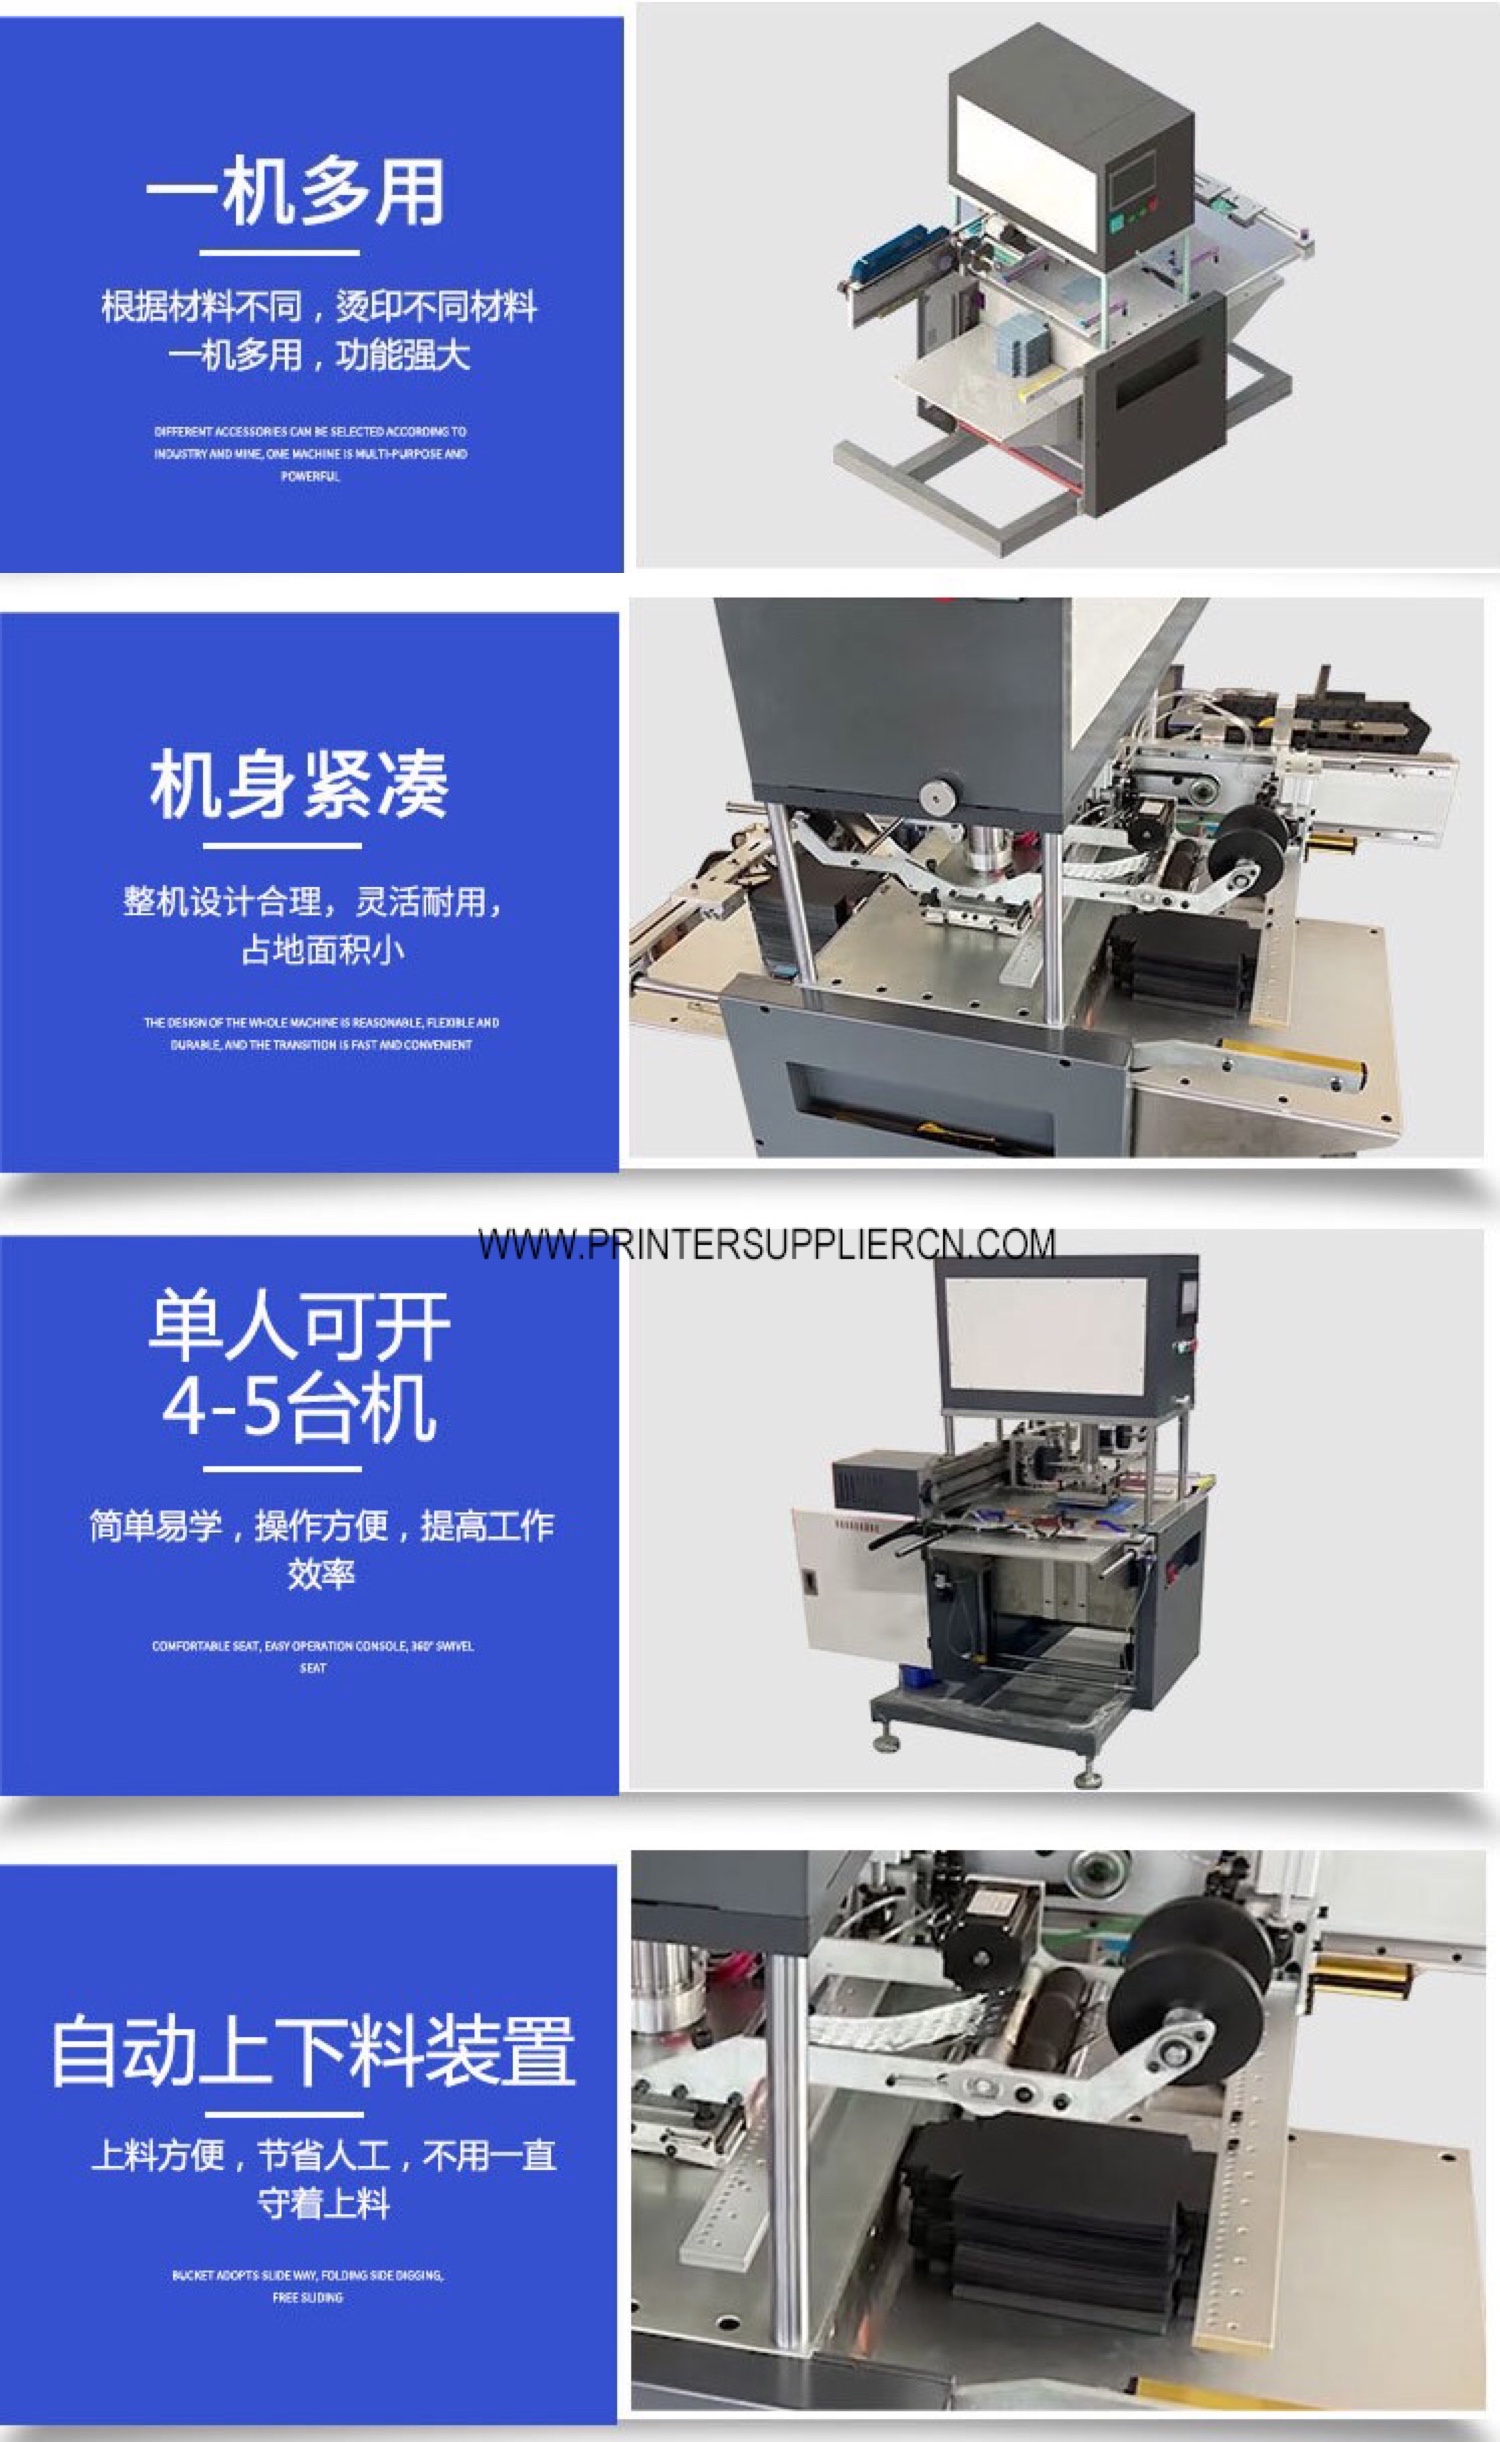 Automatic Hot Stamping Machine for Rigid Box